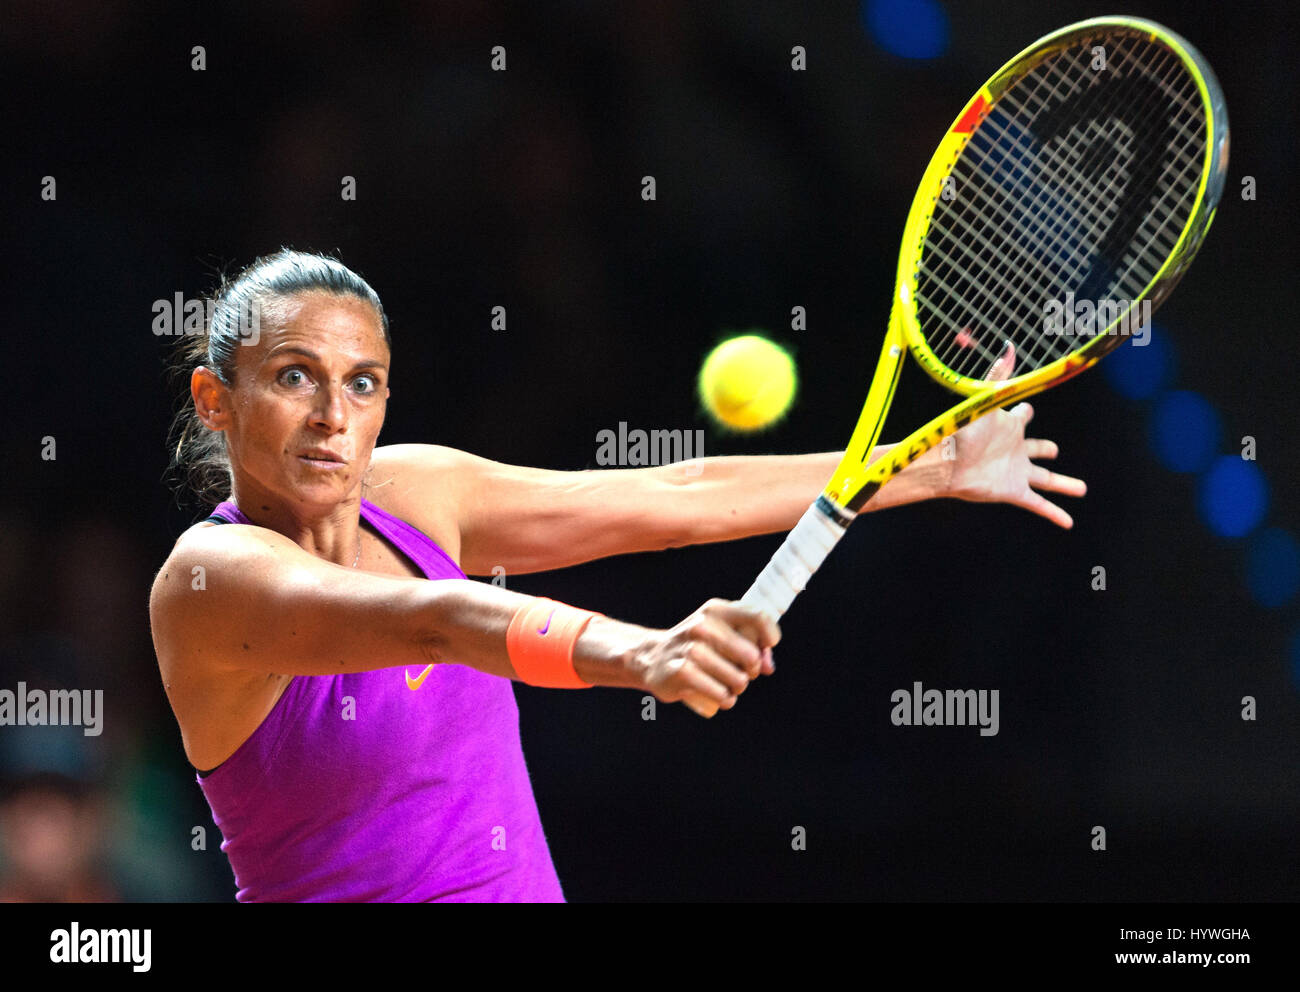 Stuttgart, Germany. 26th Apr, 2017.  Roberta Vinci from Italy does a backhand strike against Russia's Sharapova during their first round tennis match at the Porsche Tennis Grand Prix in Stuttgart, Germany, 26 April 2017. Credit: dpa picture alliance/Alamy Live News Stock Photo